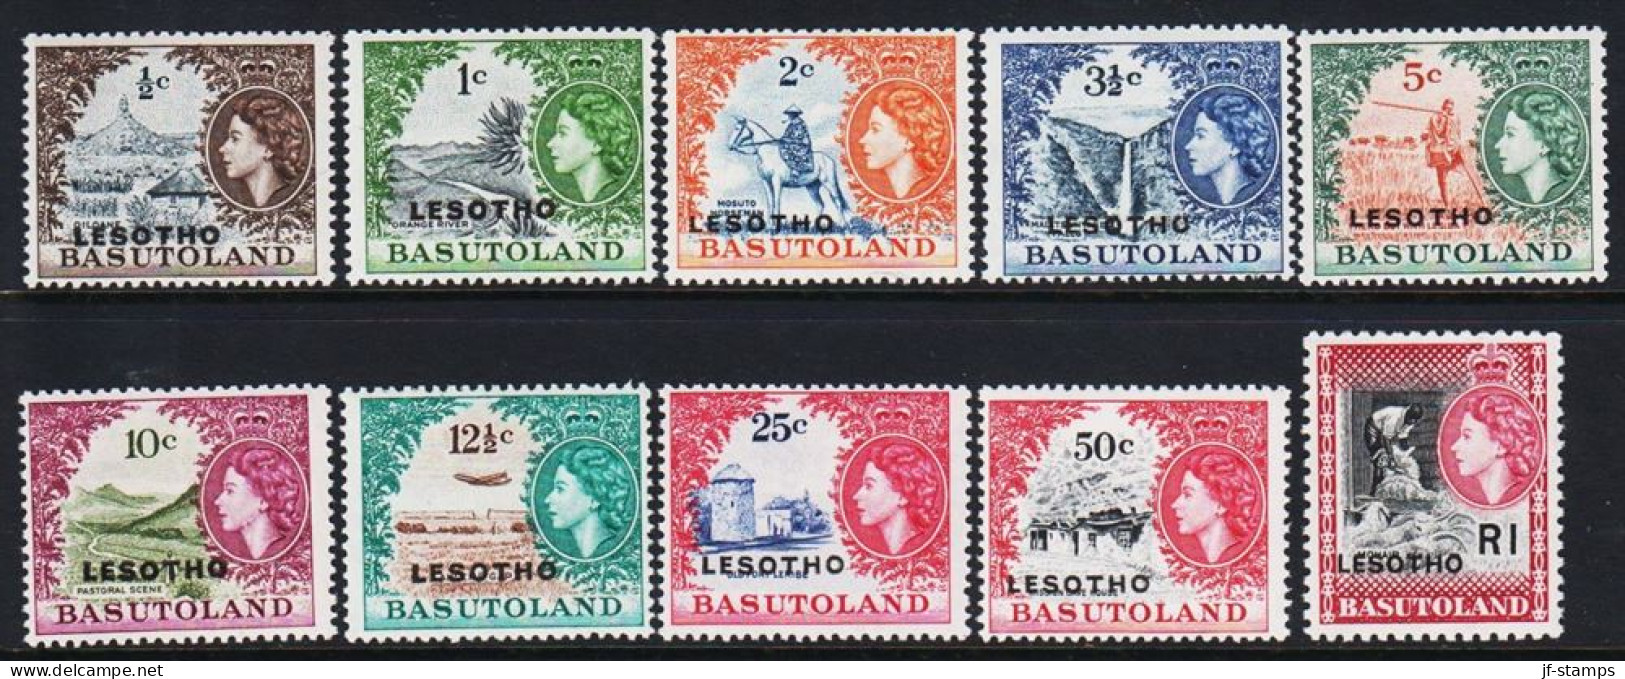 1966. LESOTHO. LESOTHO Overprint On Stamps From BASUTOLAND, Complete Set With 10 Stamps. Nev... (Michel 5-14) - JF544635 - Lesotho (1966-...)